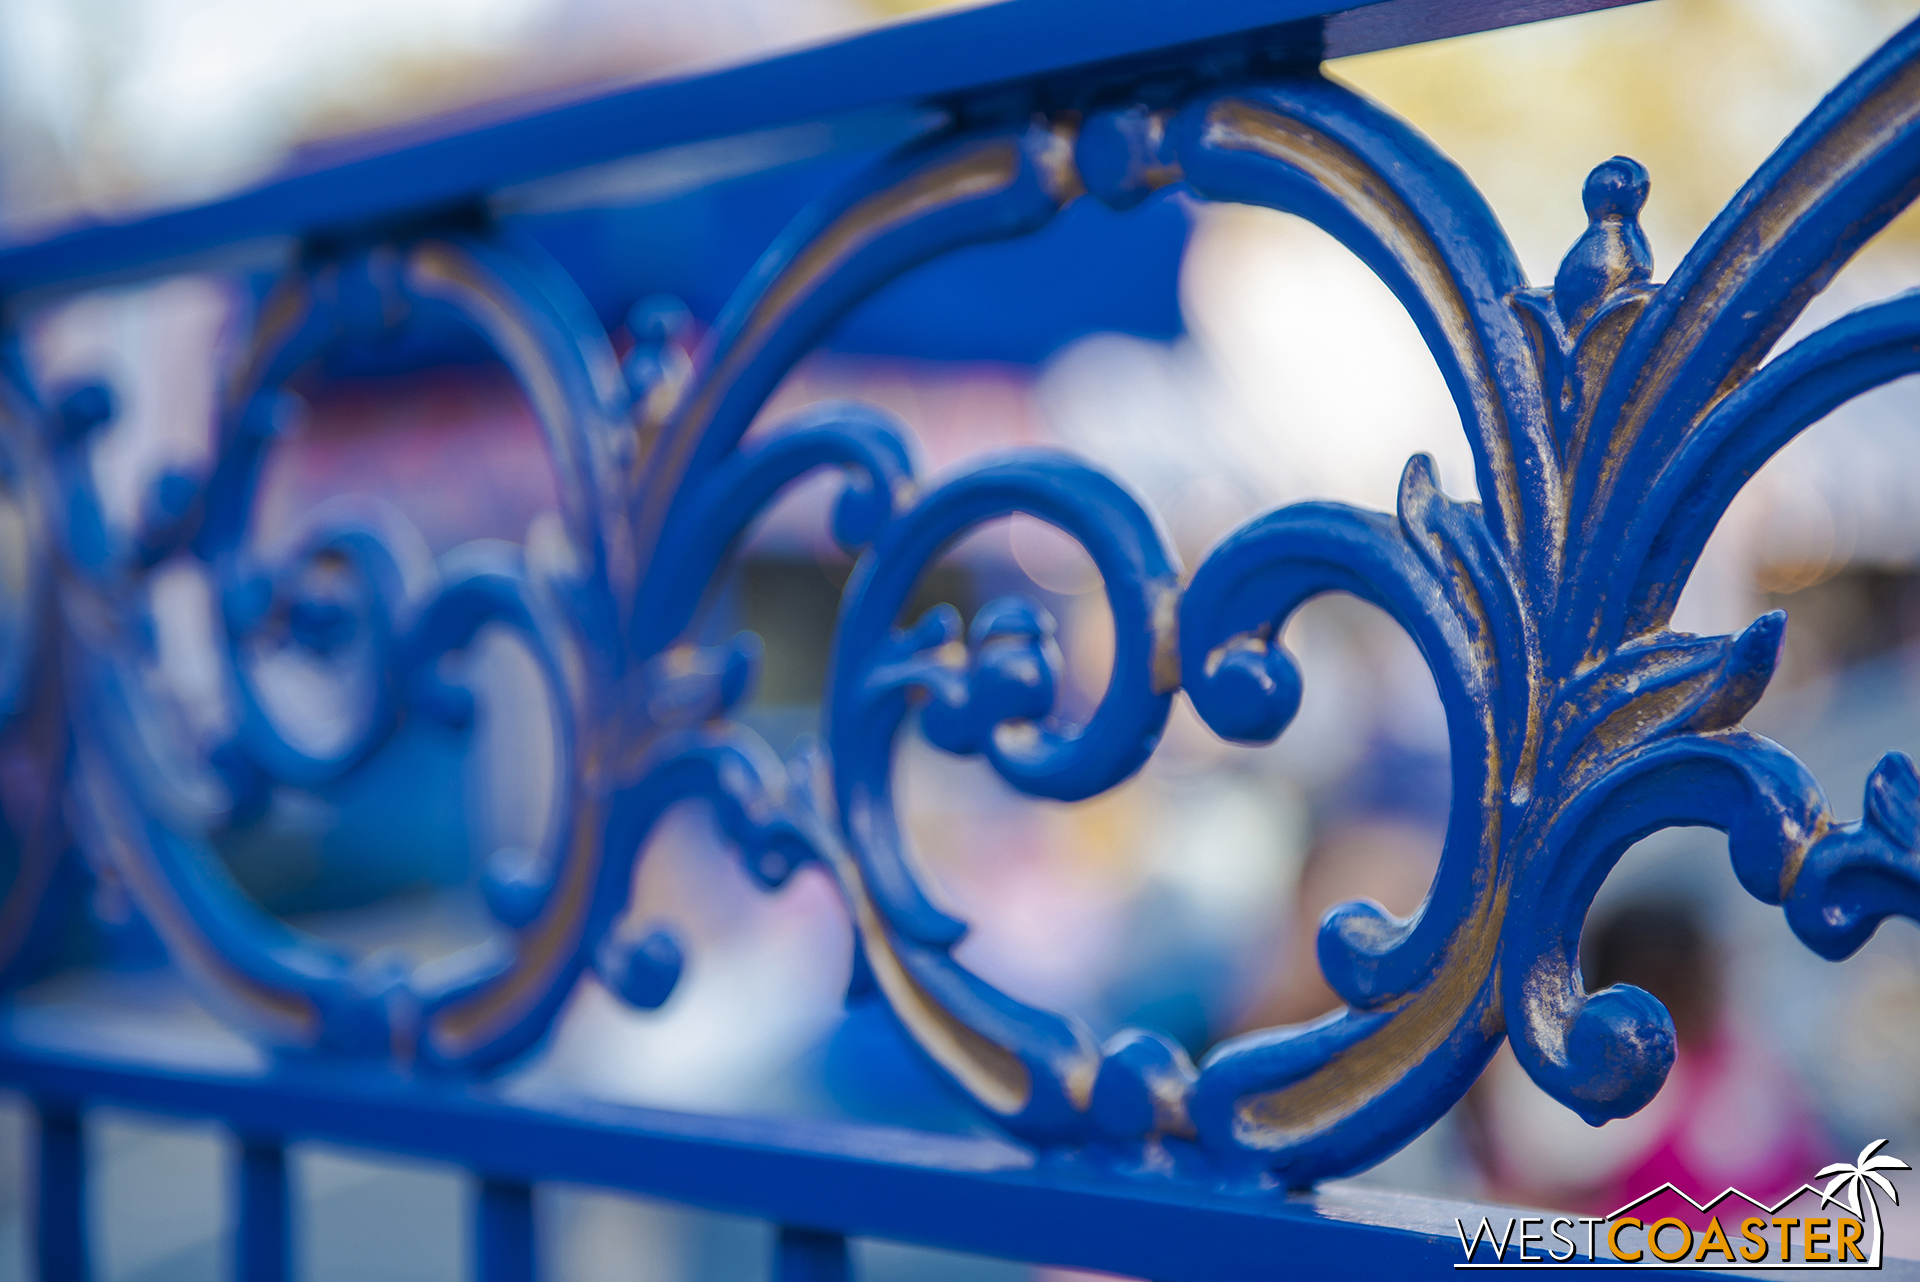  The railings have been repainted but aged a bit. 